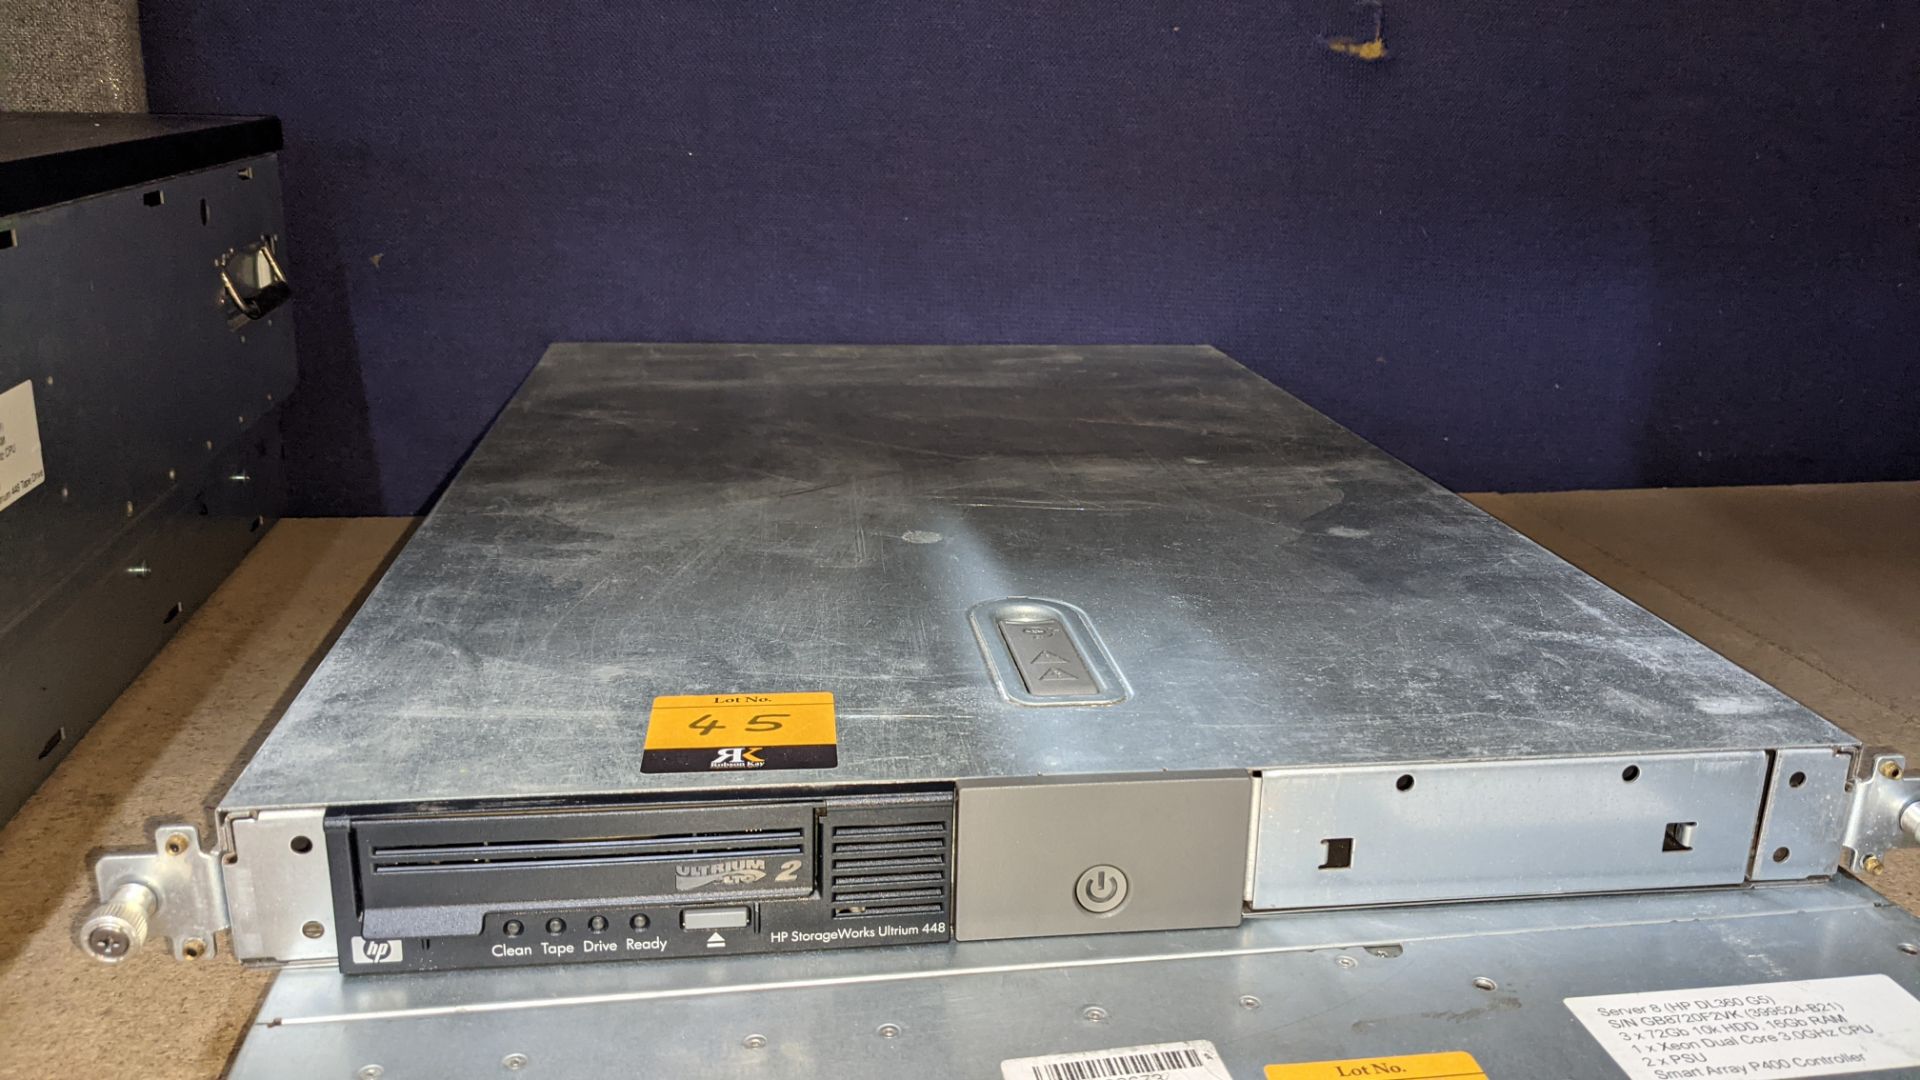 HP Storage Works single drive chassis with Ultrium 448 tape drive - Image 2 of 5